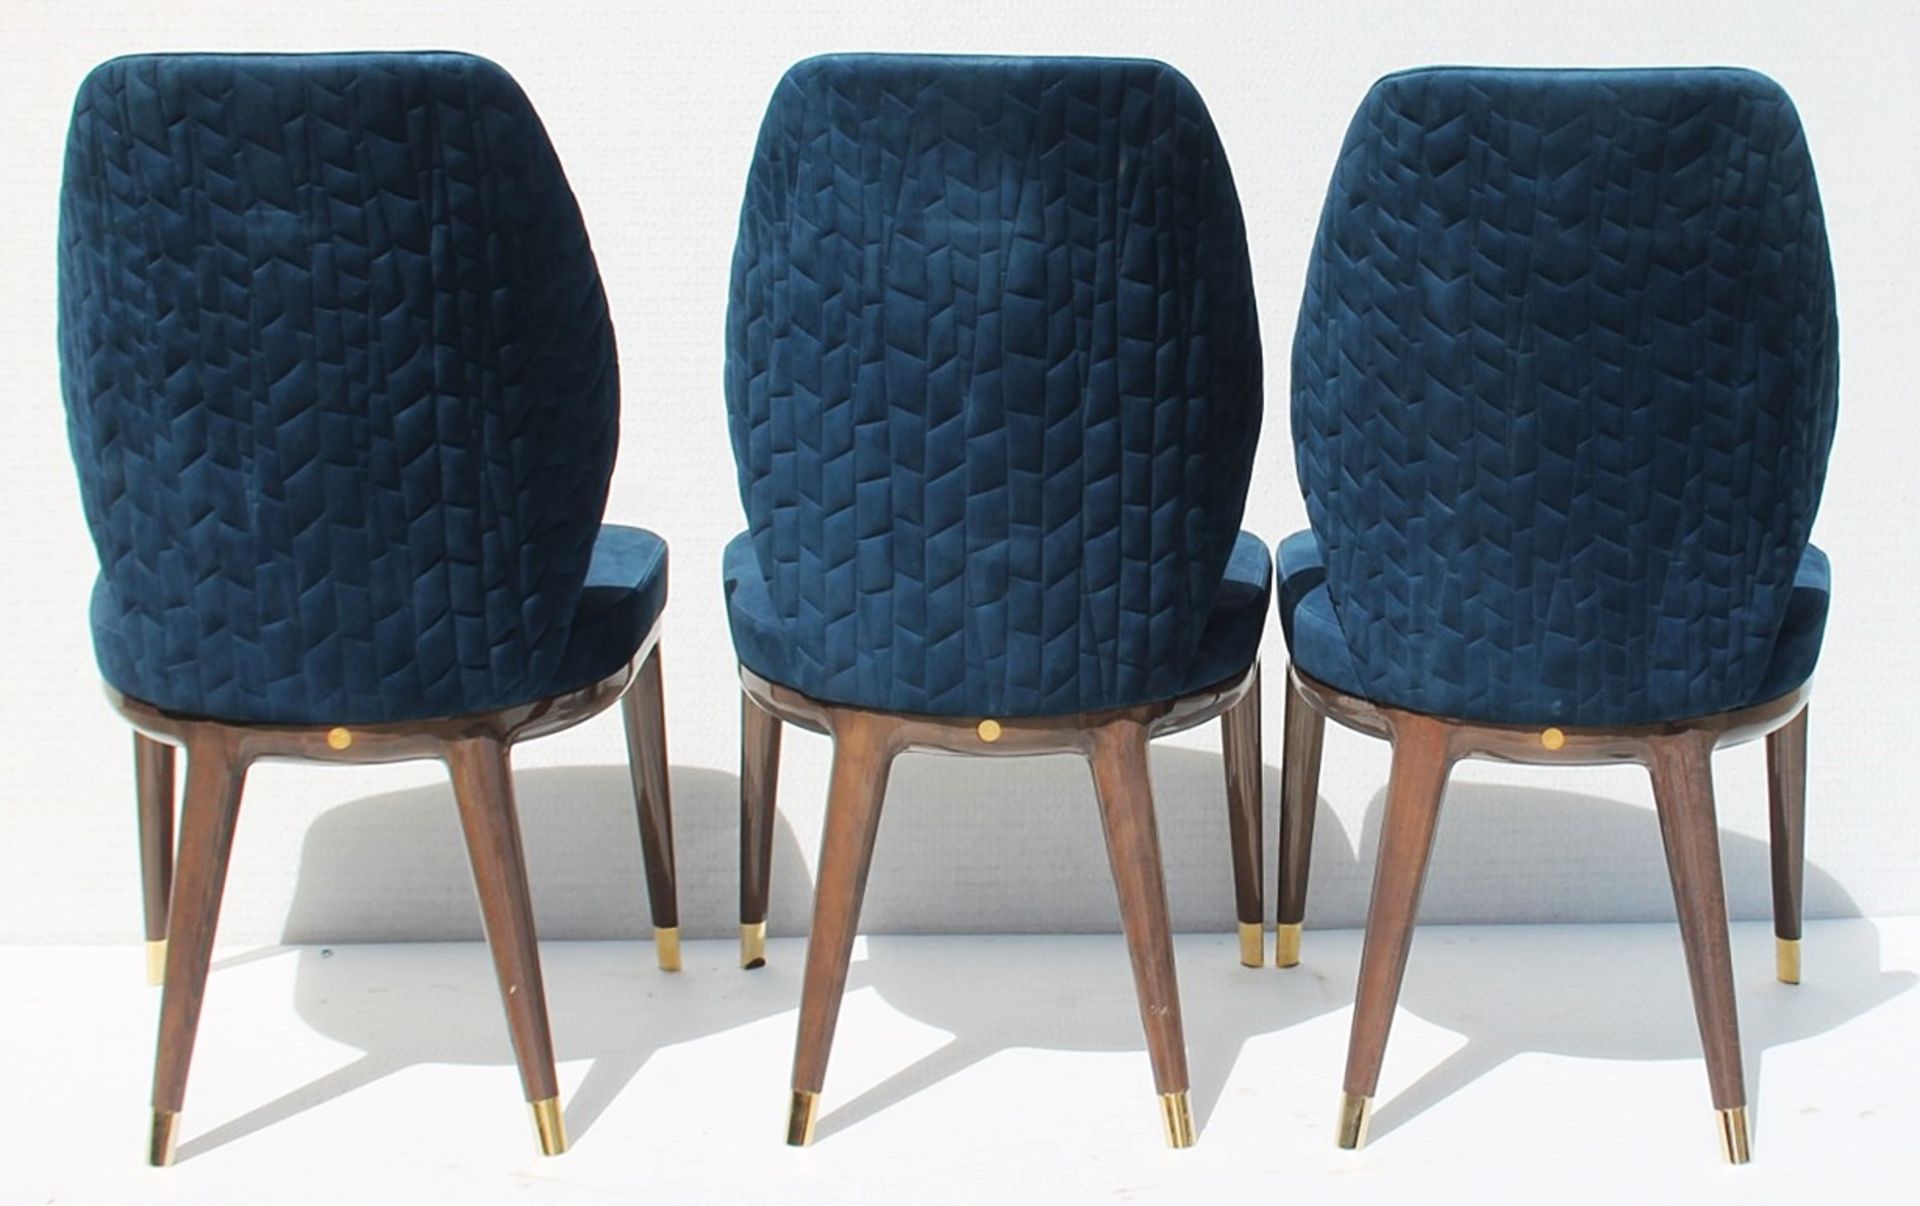 6 x GIORGIO COLLECTION 'Charisma' Luxury Dining Side Chairs In Blue - Total Original Price £15,330 - Image 5 of 17